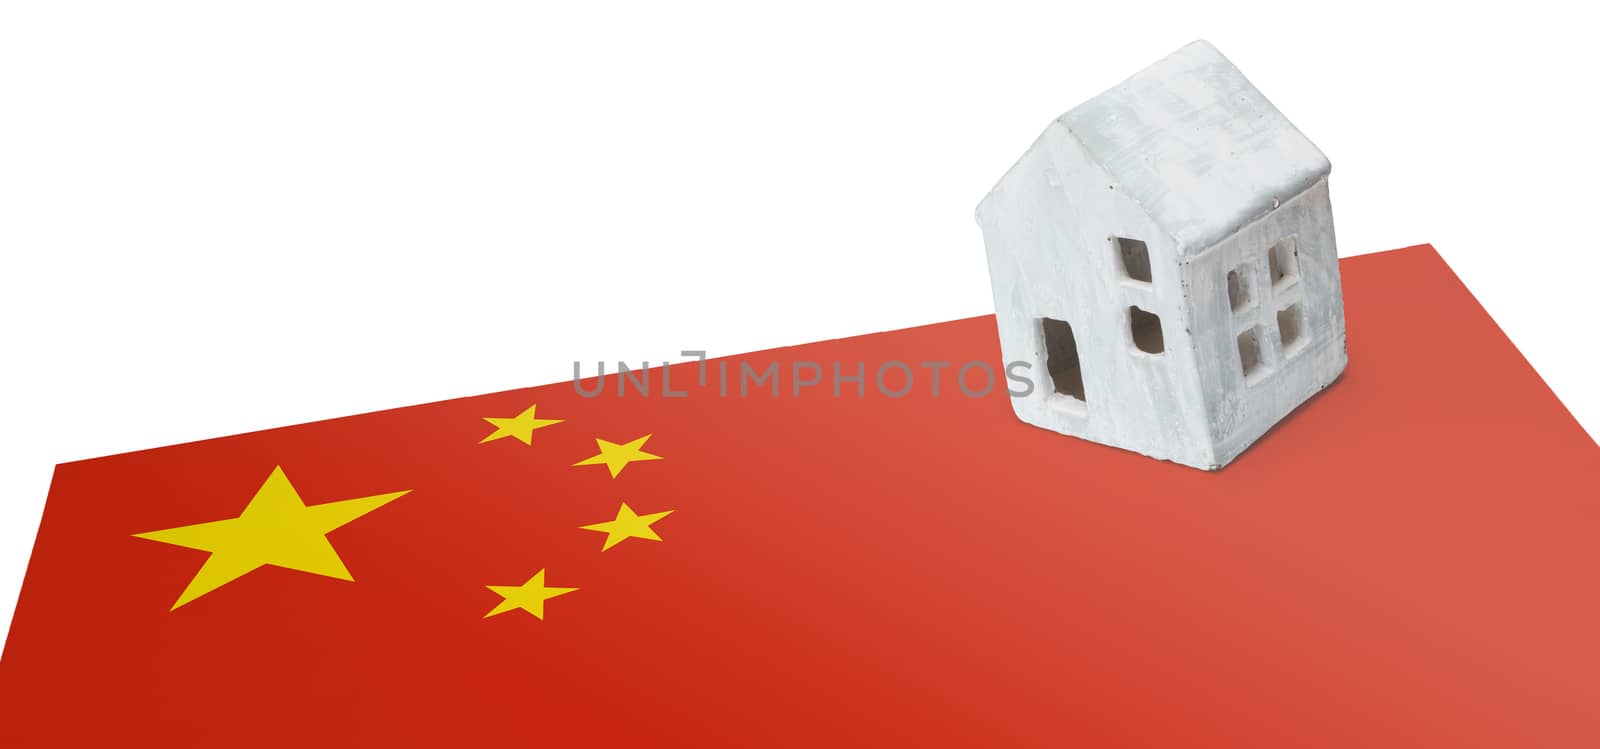 Small house on a flag - Living or migrating to China